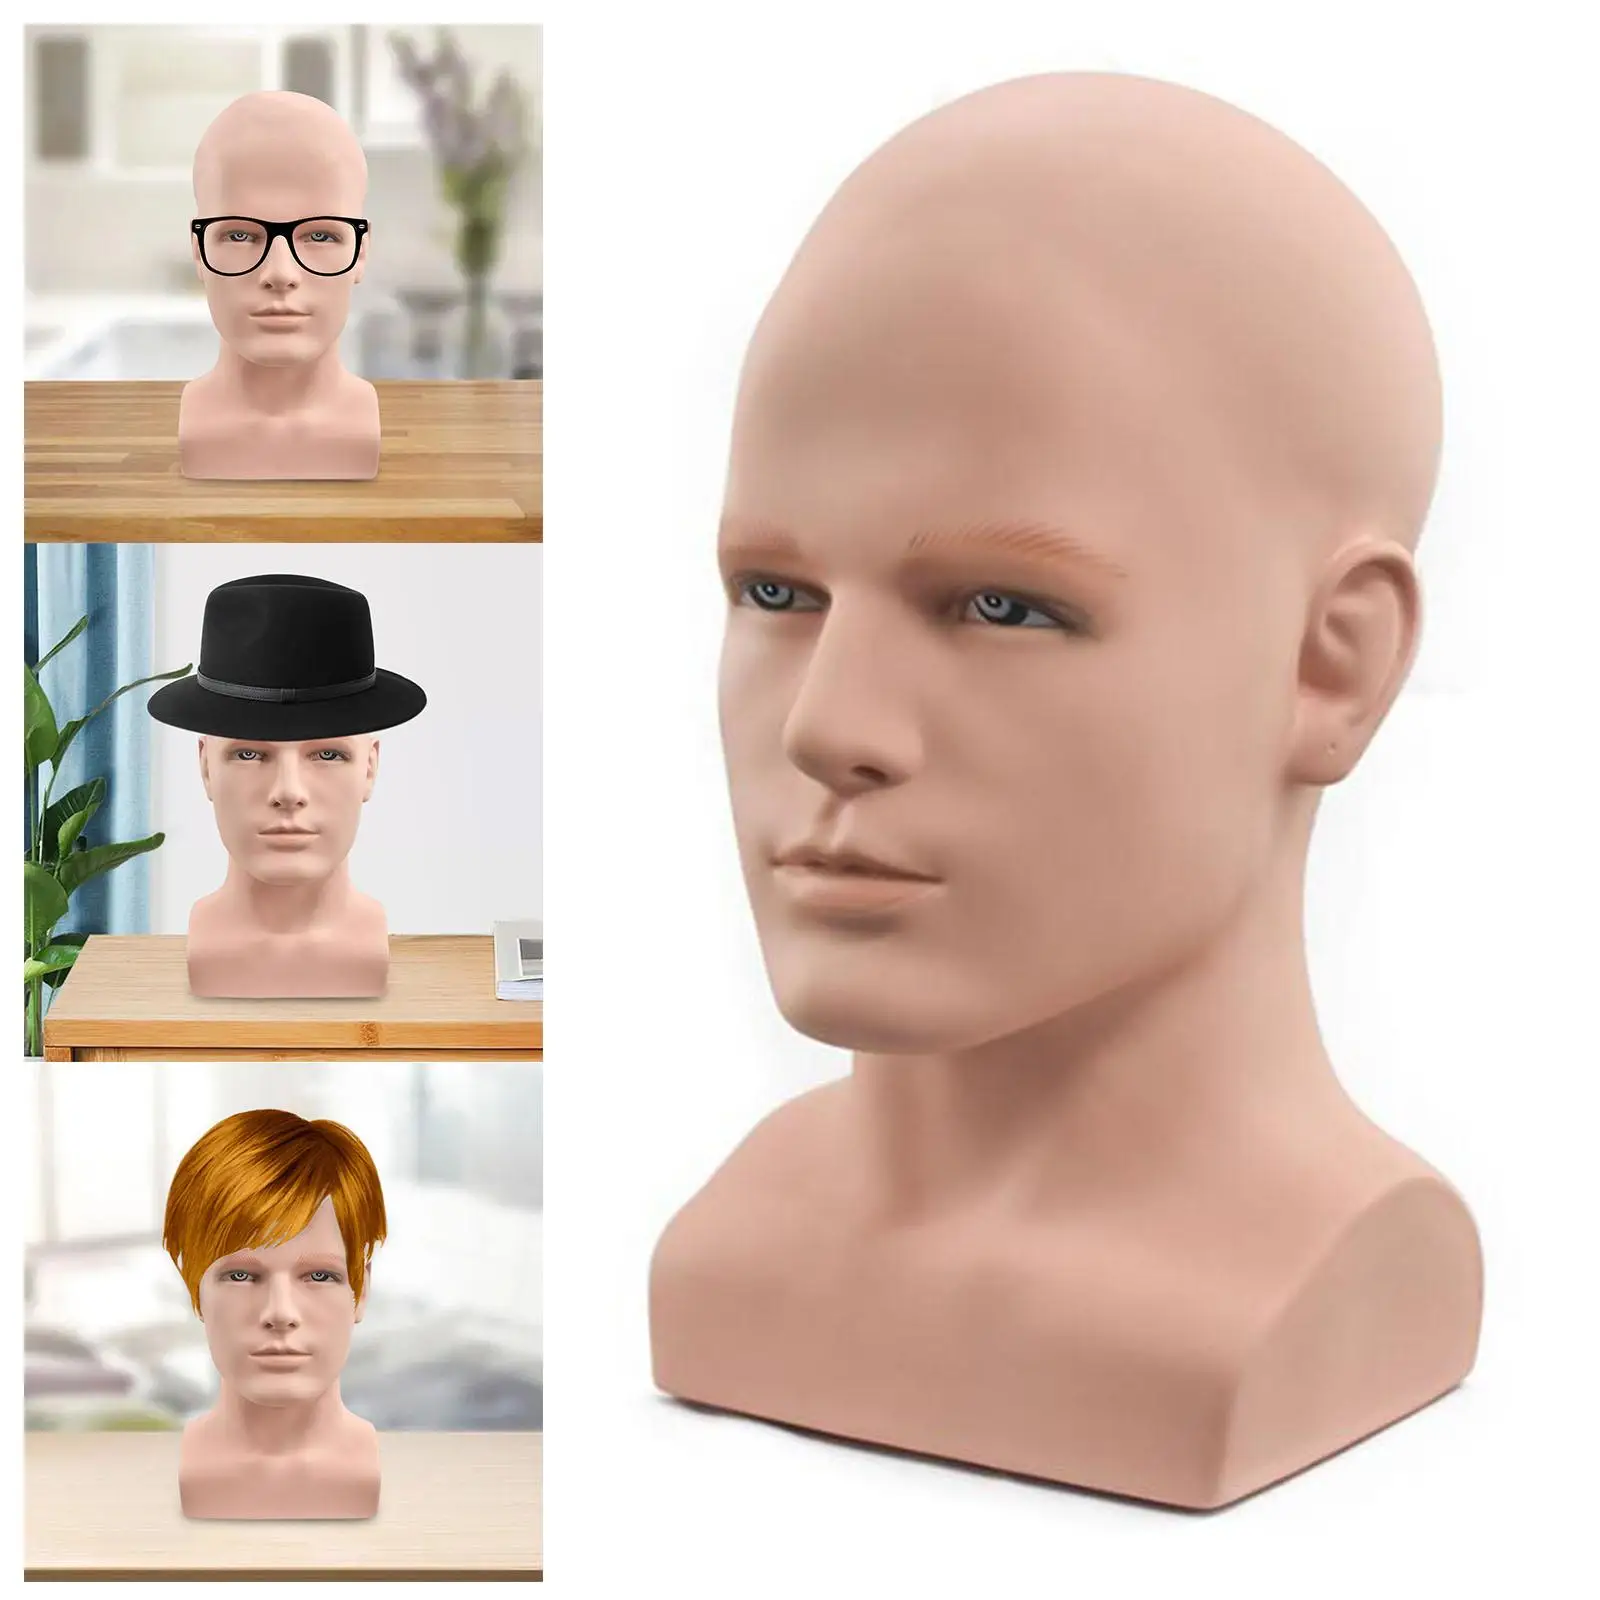 pvc Mannequin Head, Show Head Manikin Head Model, Head Bust Male head for Hat Headset Necklace Chain Stand Holder